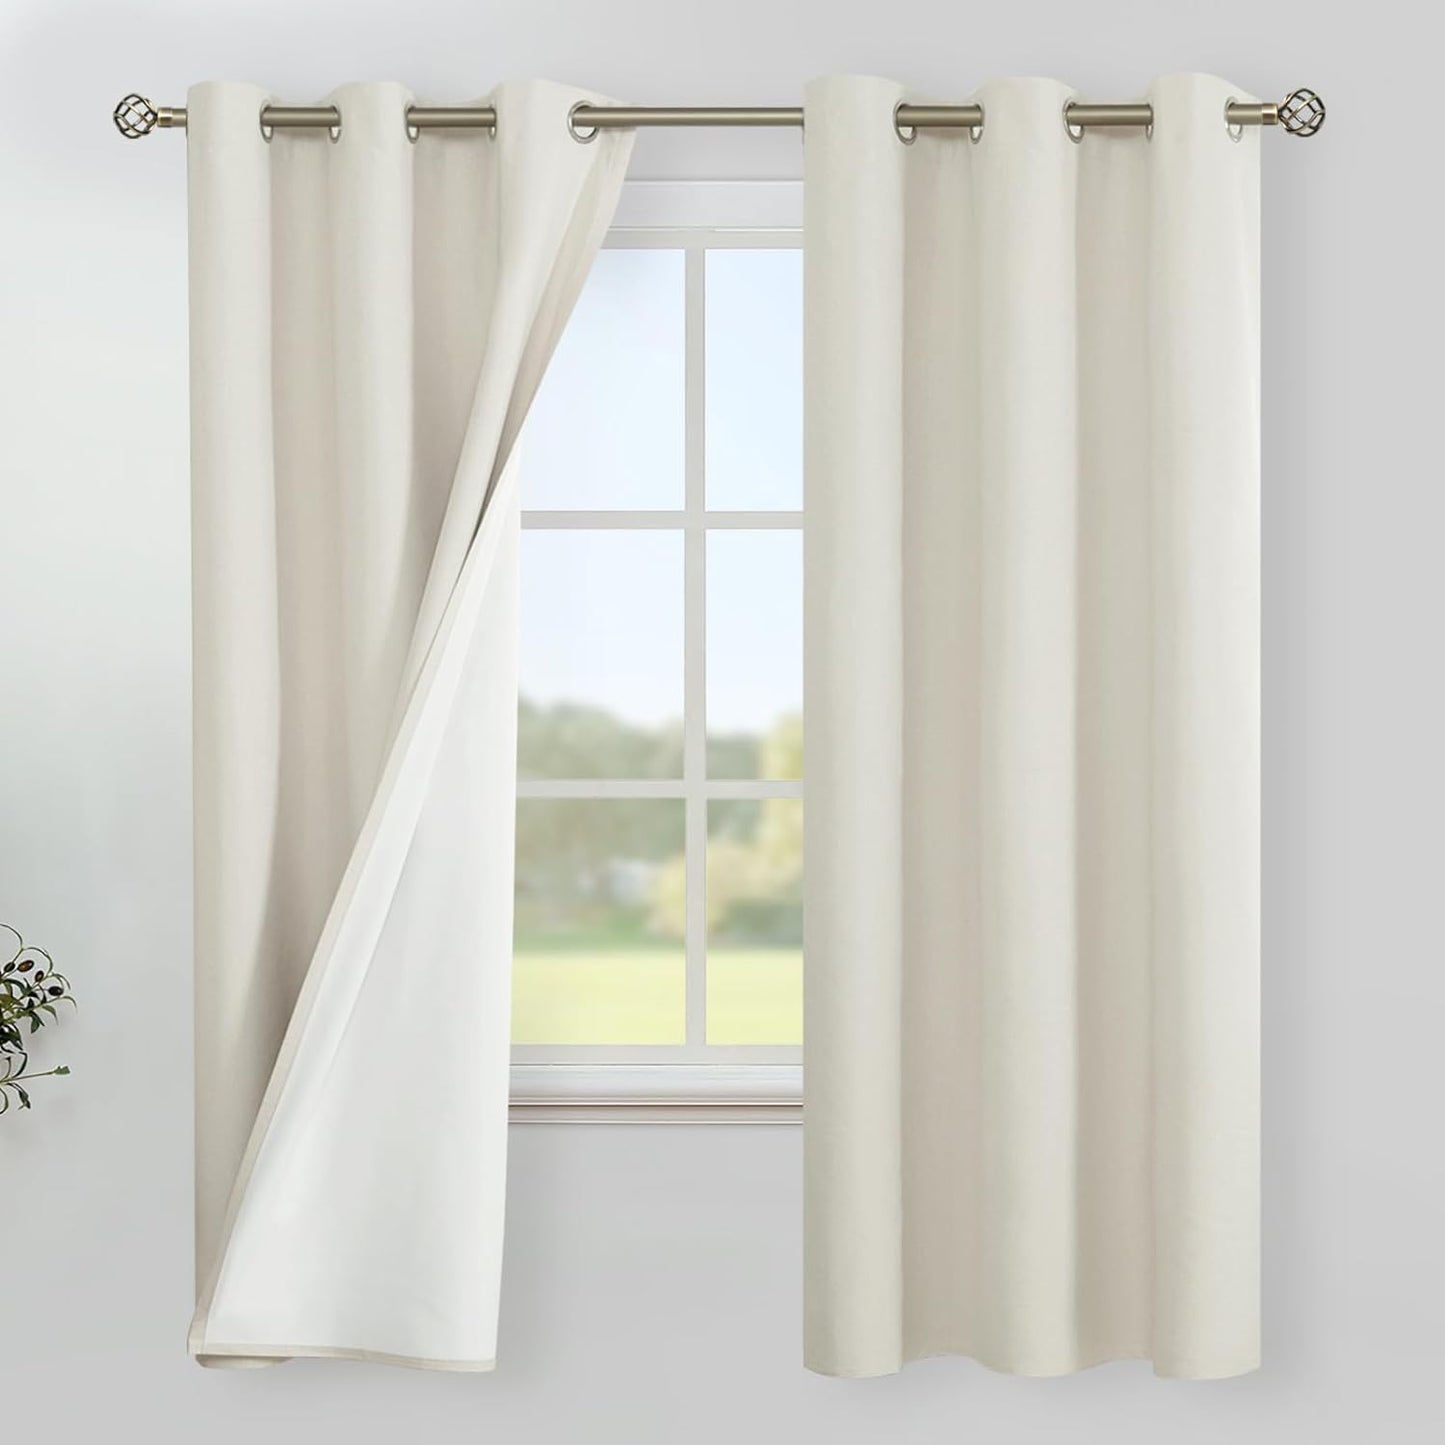 Youngstex Linen Blackout Curtains 63 Inches Long, Grommet Full Room Darkening Linen Window Drapes Thermal Insulated for Living Room Bedroom, 2 Panels, 52 X 63 Inch, Linen  YoungsTex Linen 42W X 63L 